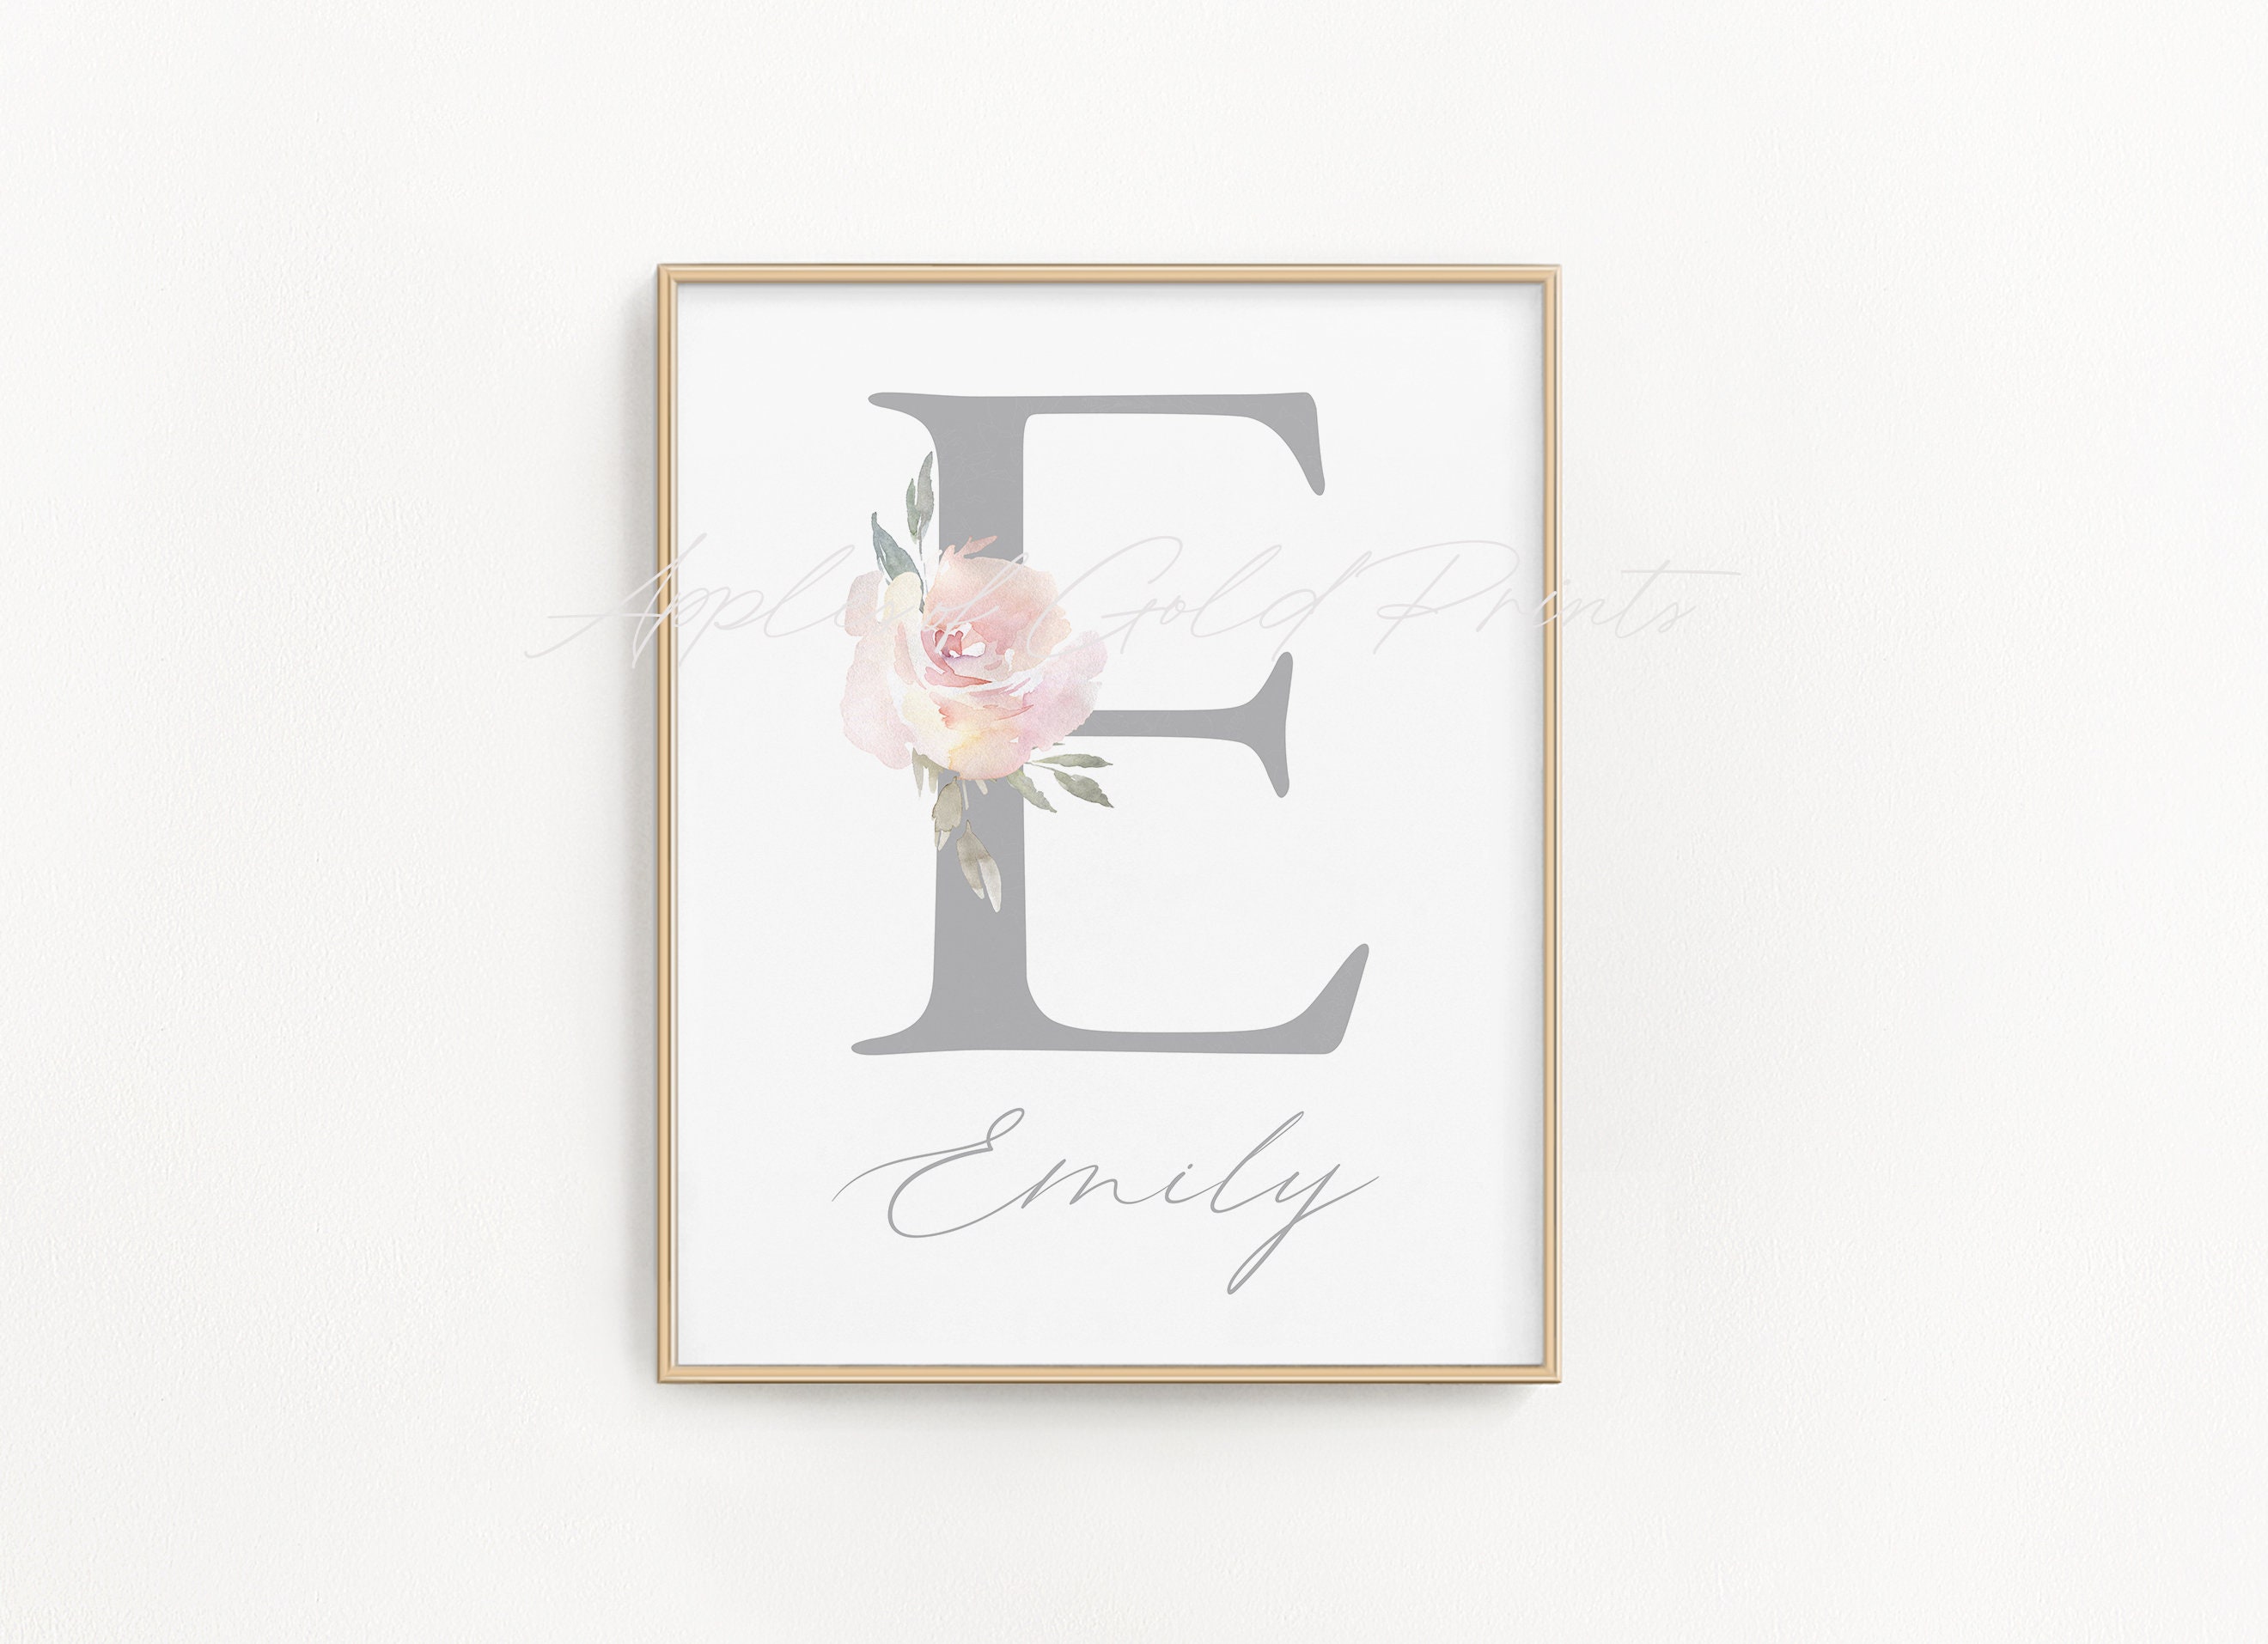 Flowers Blush Pink Wall Art Pictures For Girls Room Decoration Personalized  Poster Baby Name Custom Canvas Painting Nursery Prints Pink 211222 From  Mu007, $2.34